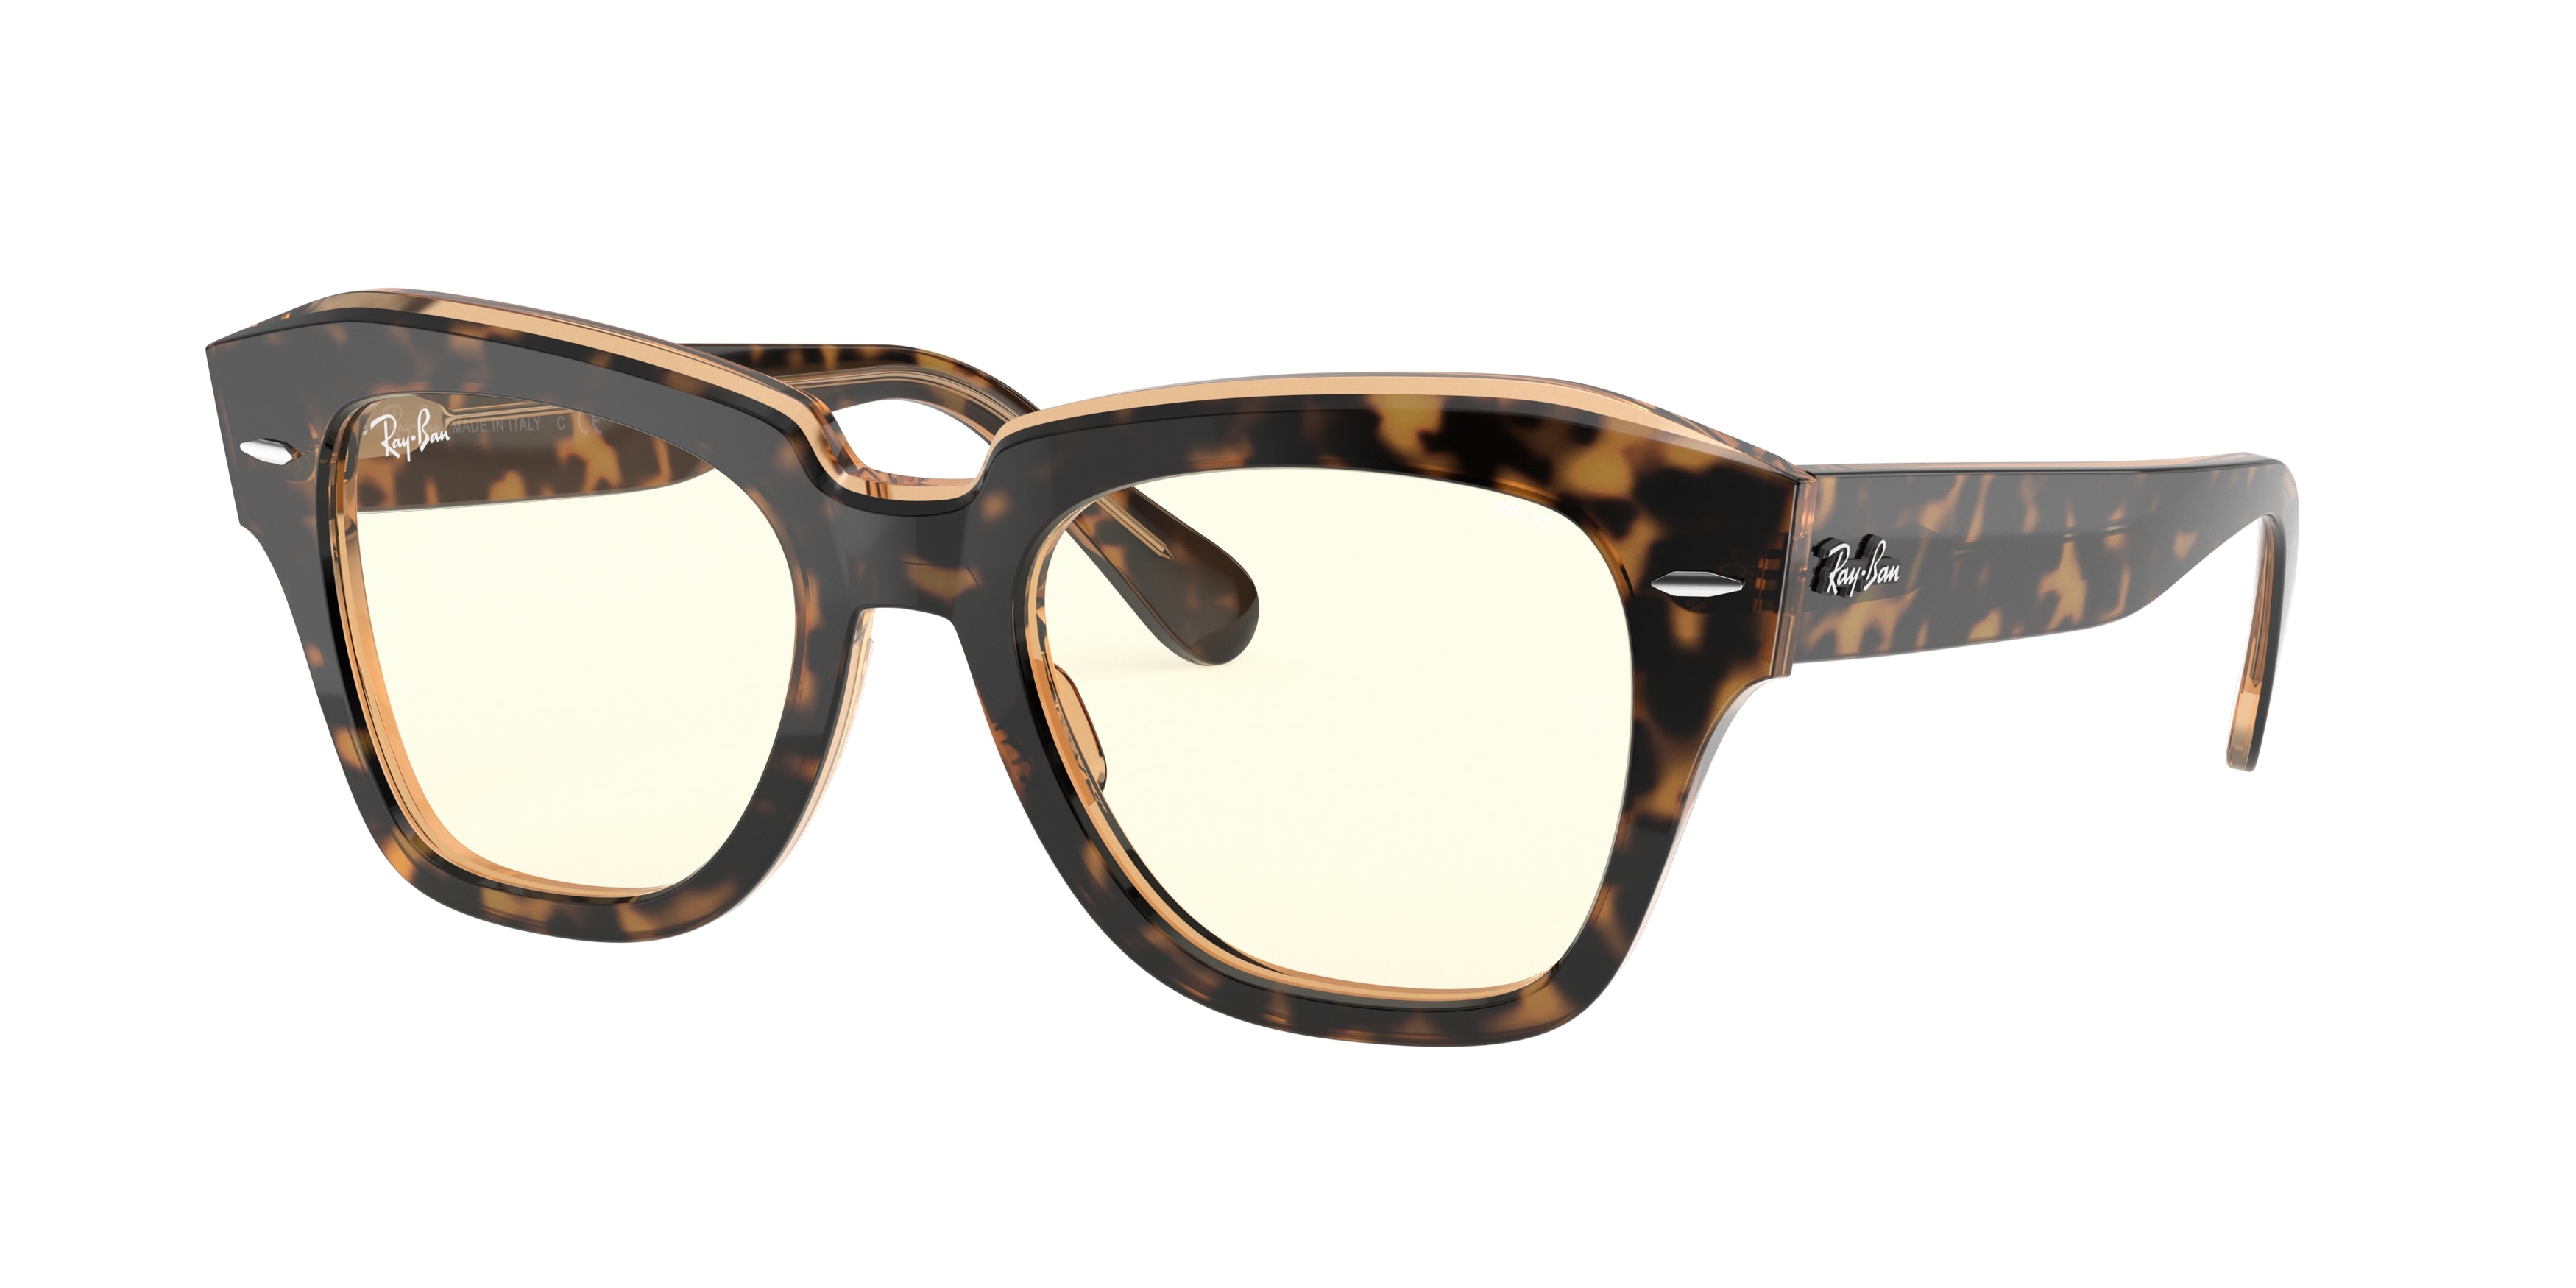 Ray-ban State Street RB2186 - Larbalestier Opticians